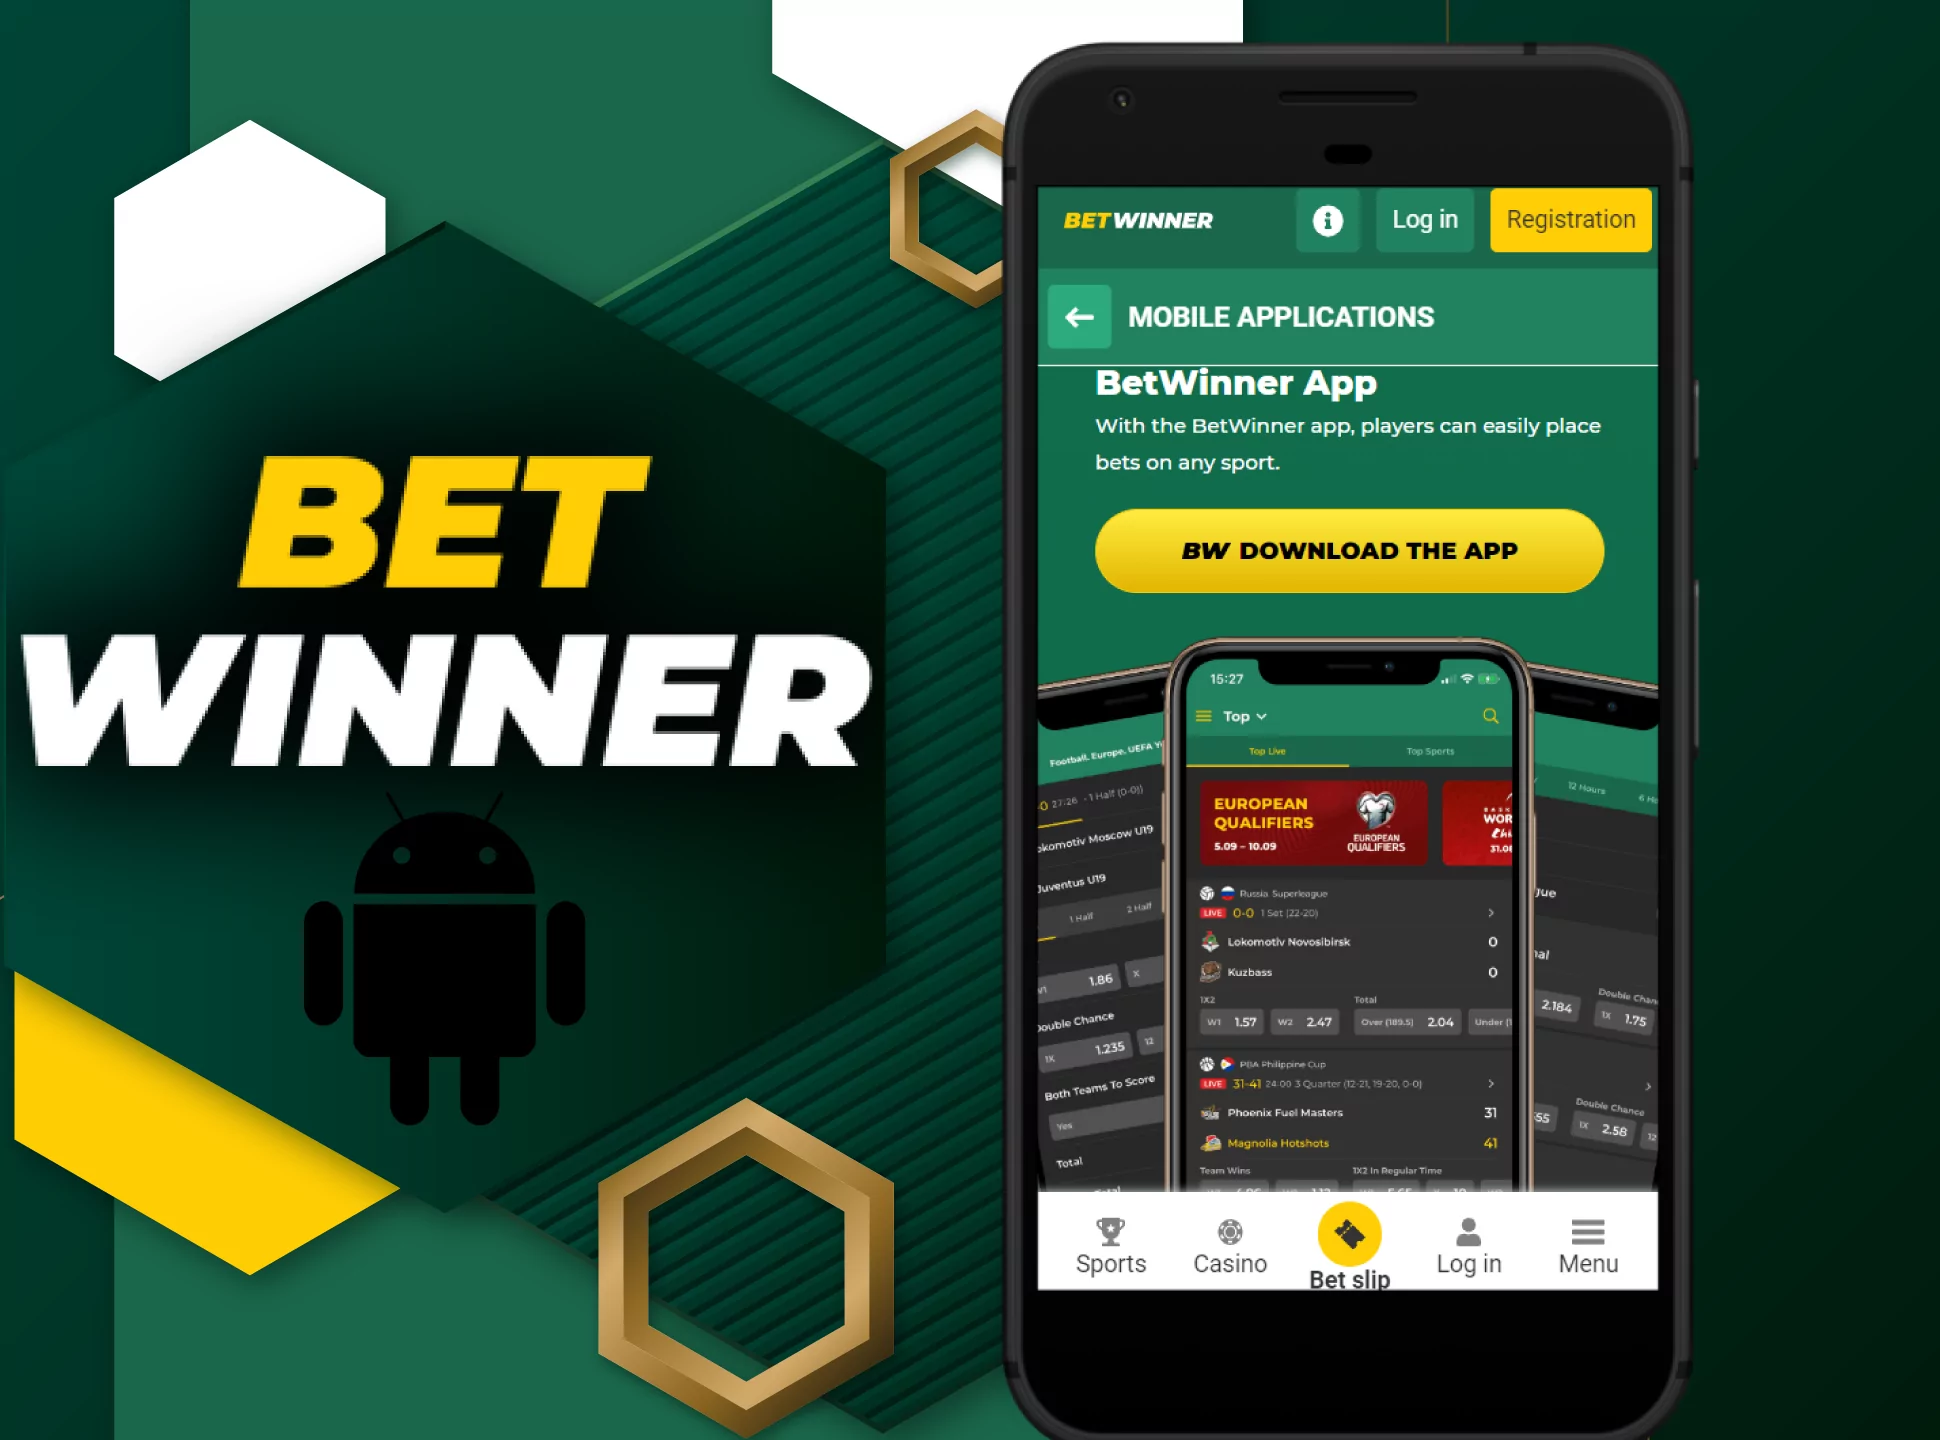 Betwinner mobil Consulting – What The Heck Is That?